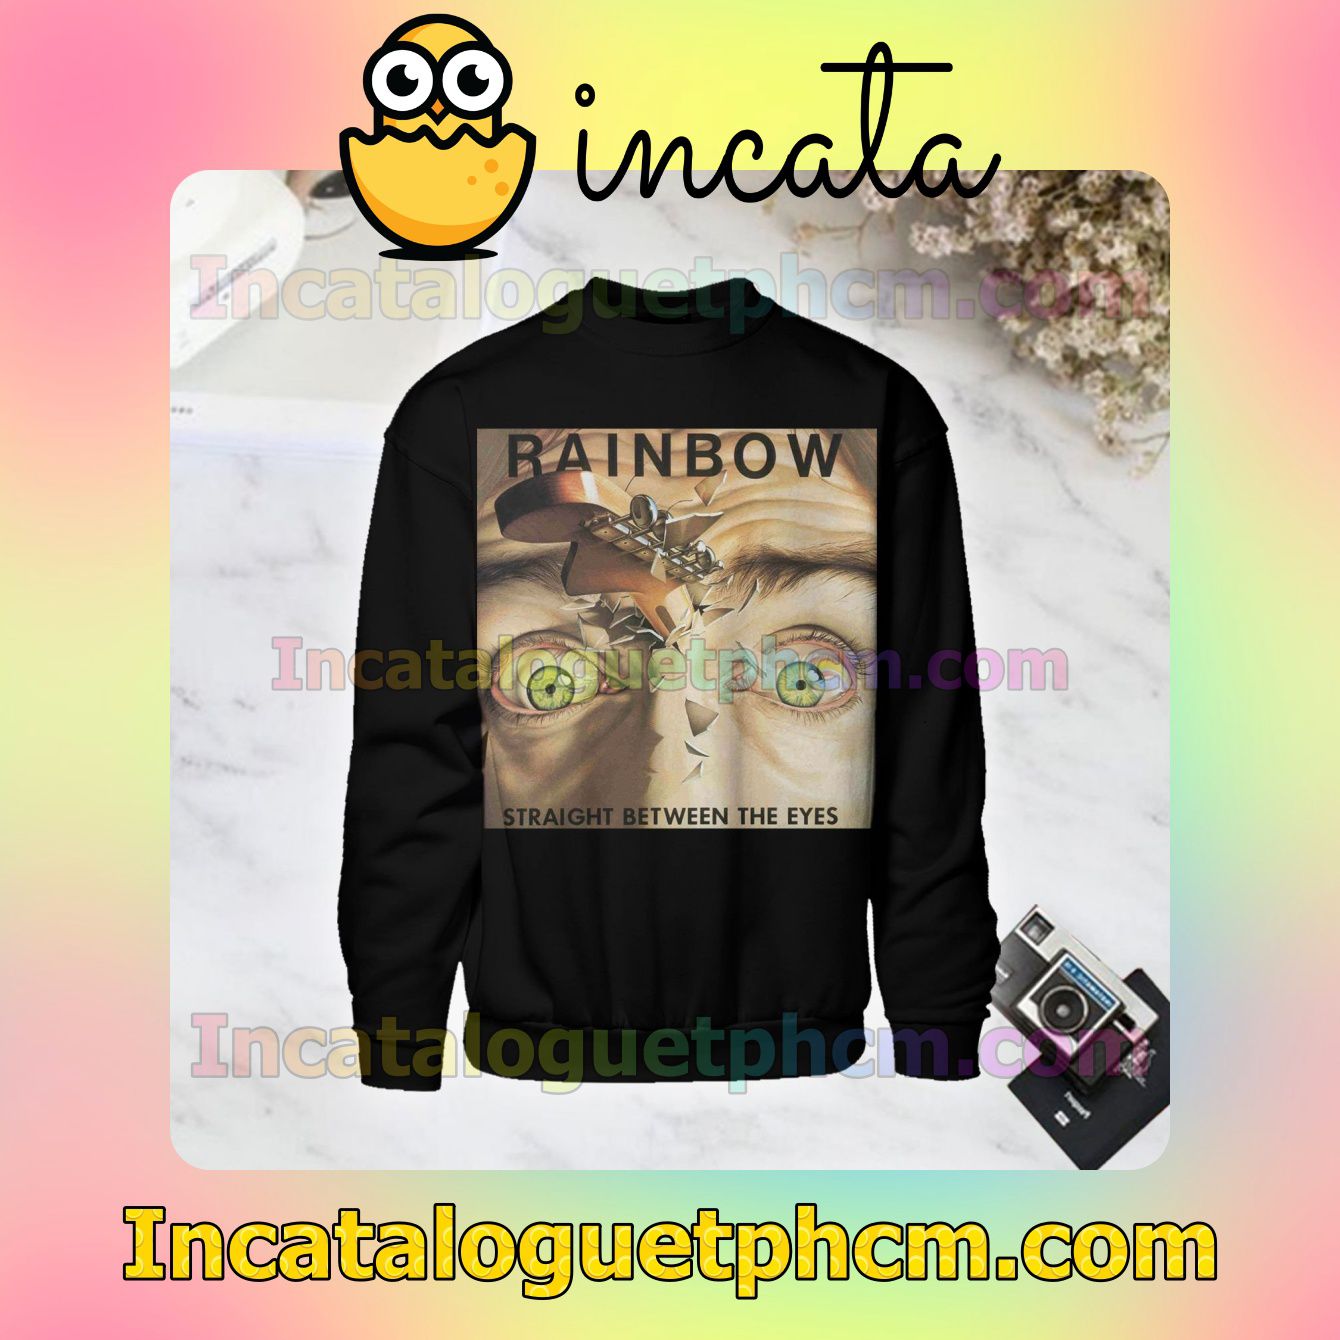 Rainbow Straight Between The Eyes Album Cover Black Long Sleeve Shirts For Men